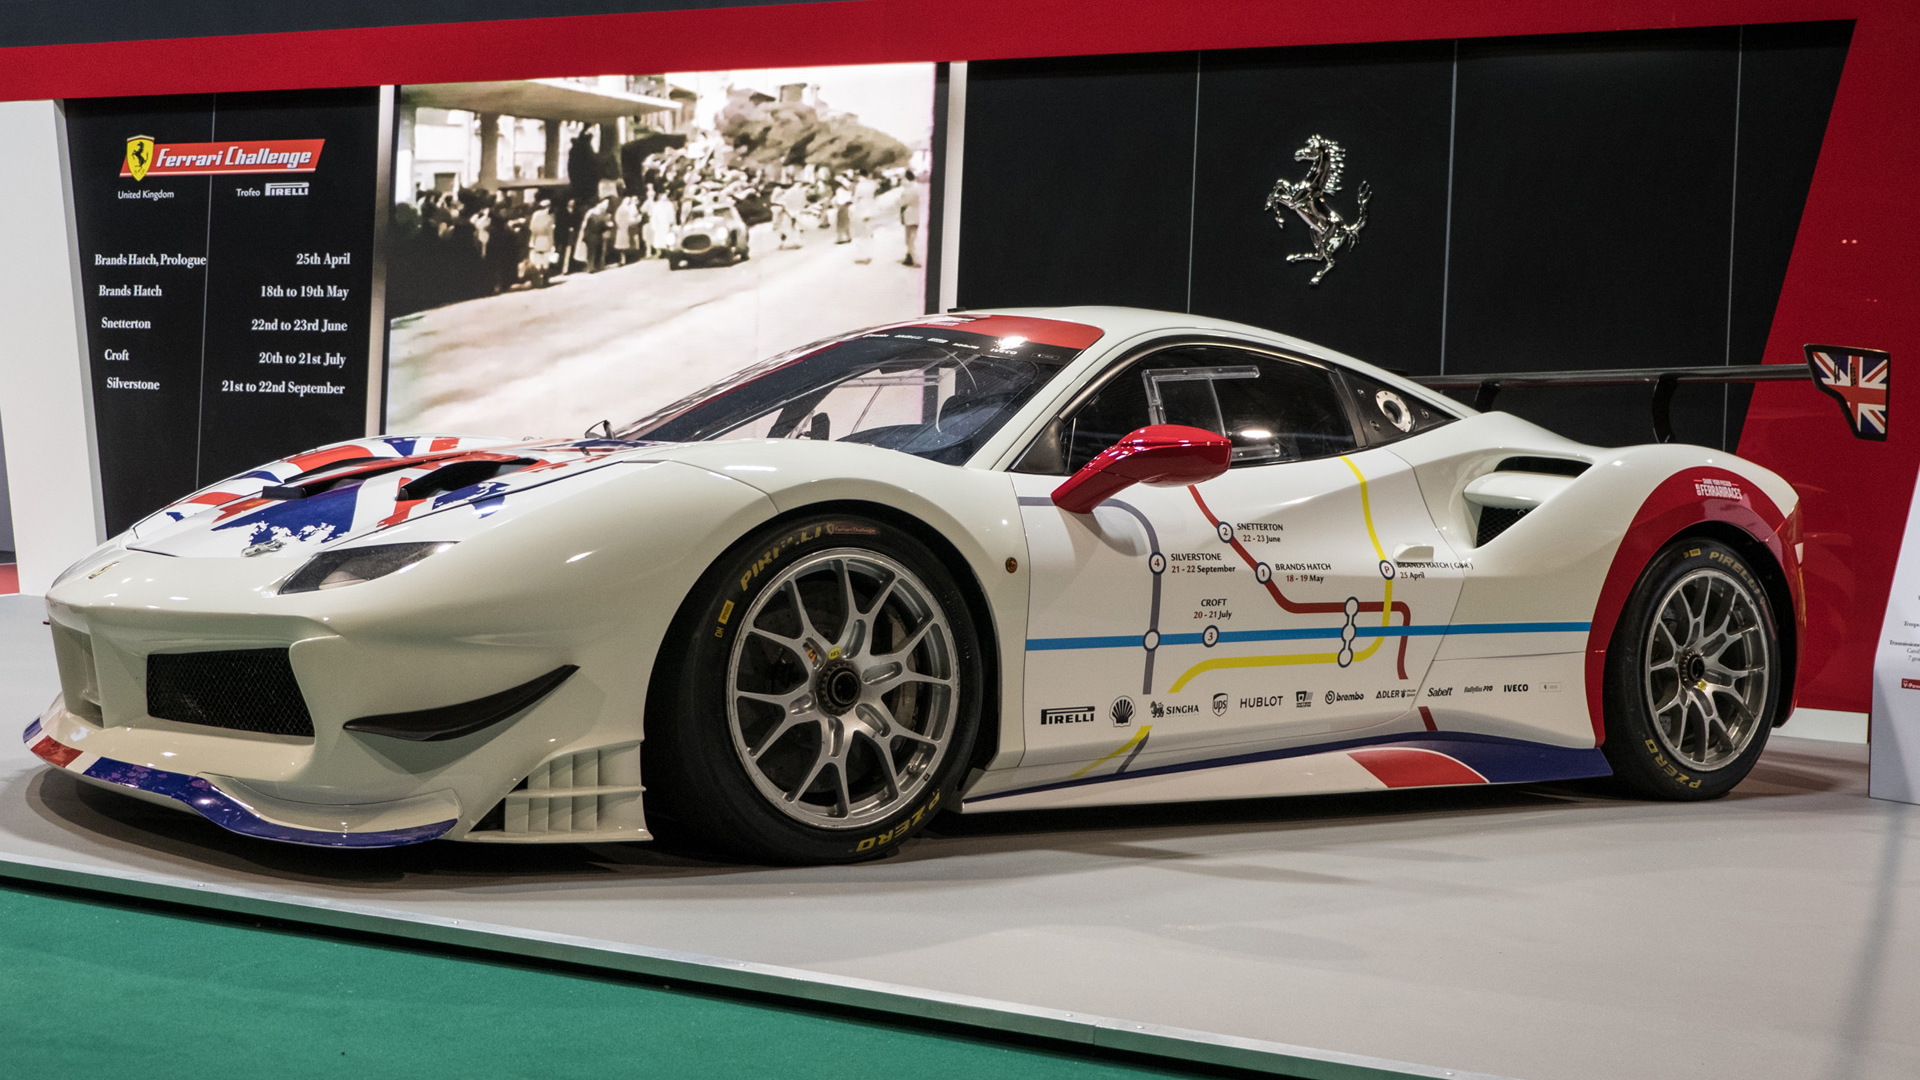 2018 Ferrari 488 GTE race car with livery depicting all stages of Club Competizioni GT